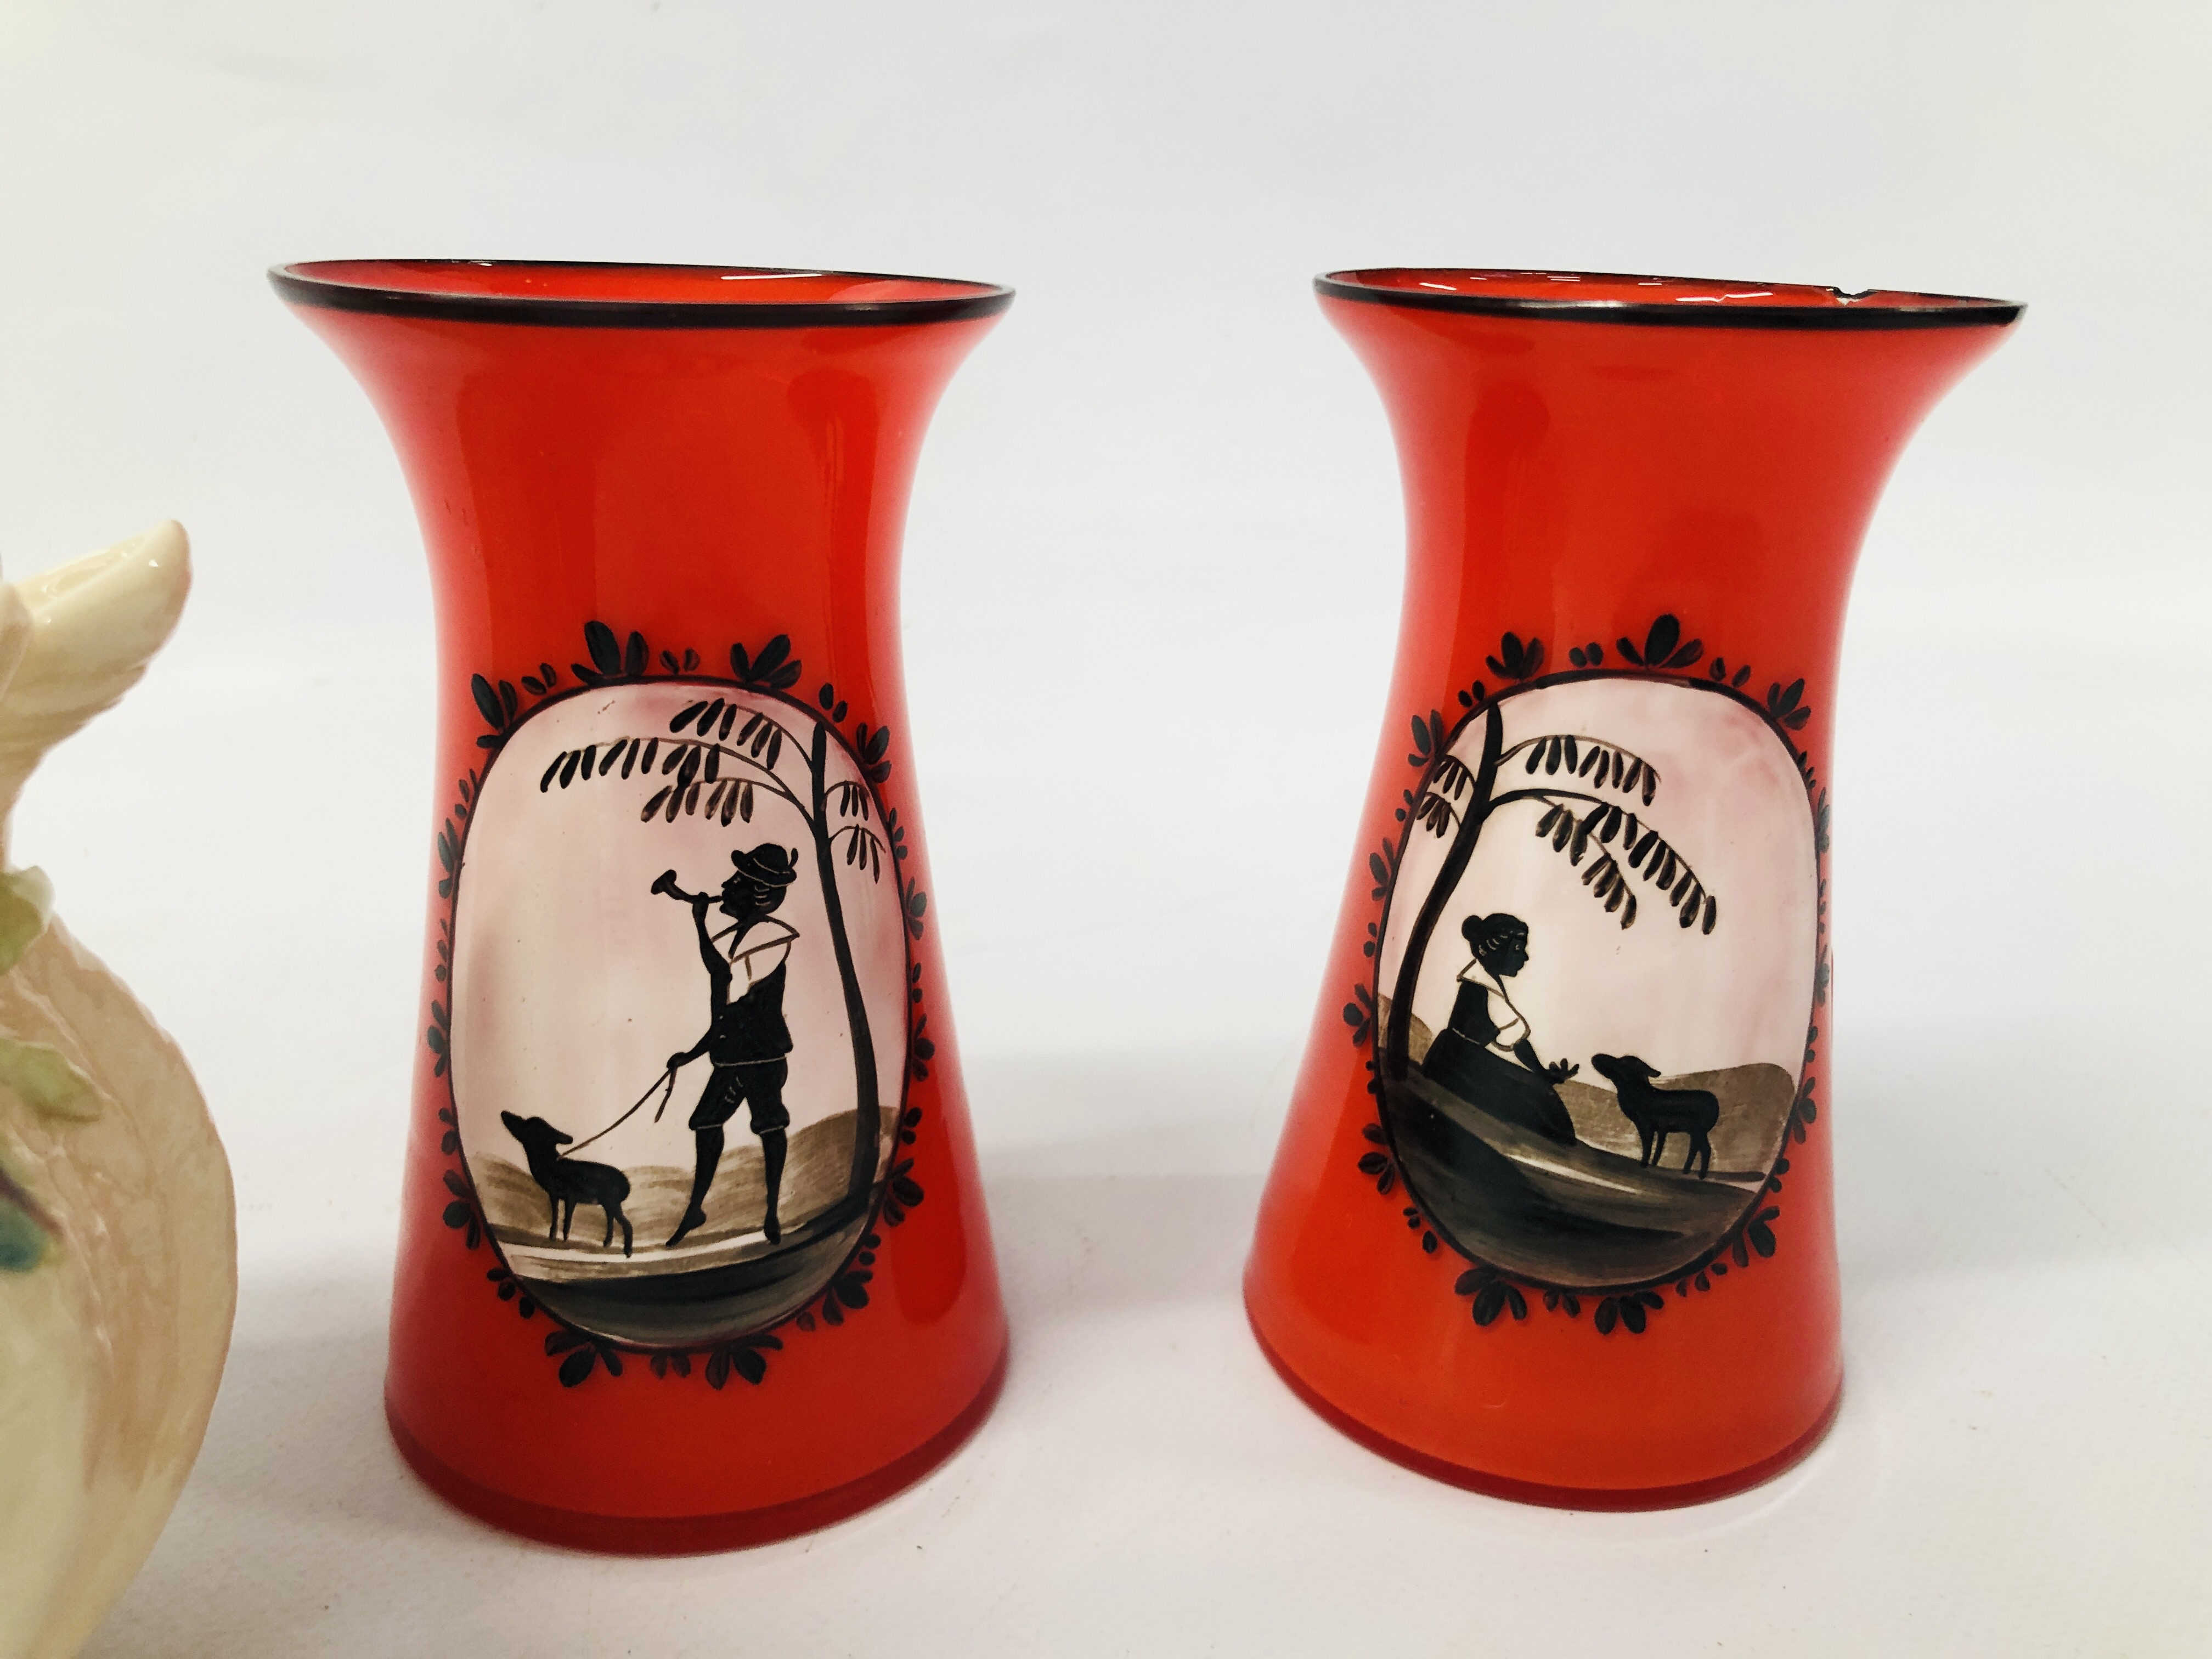 PAIR OF VINTAGE RED GLASS VASES DECORATED WITH A BLACK AND WHITE CAMEO DESIGN A/F, BELLEEK VASE. - Image 2 of 6